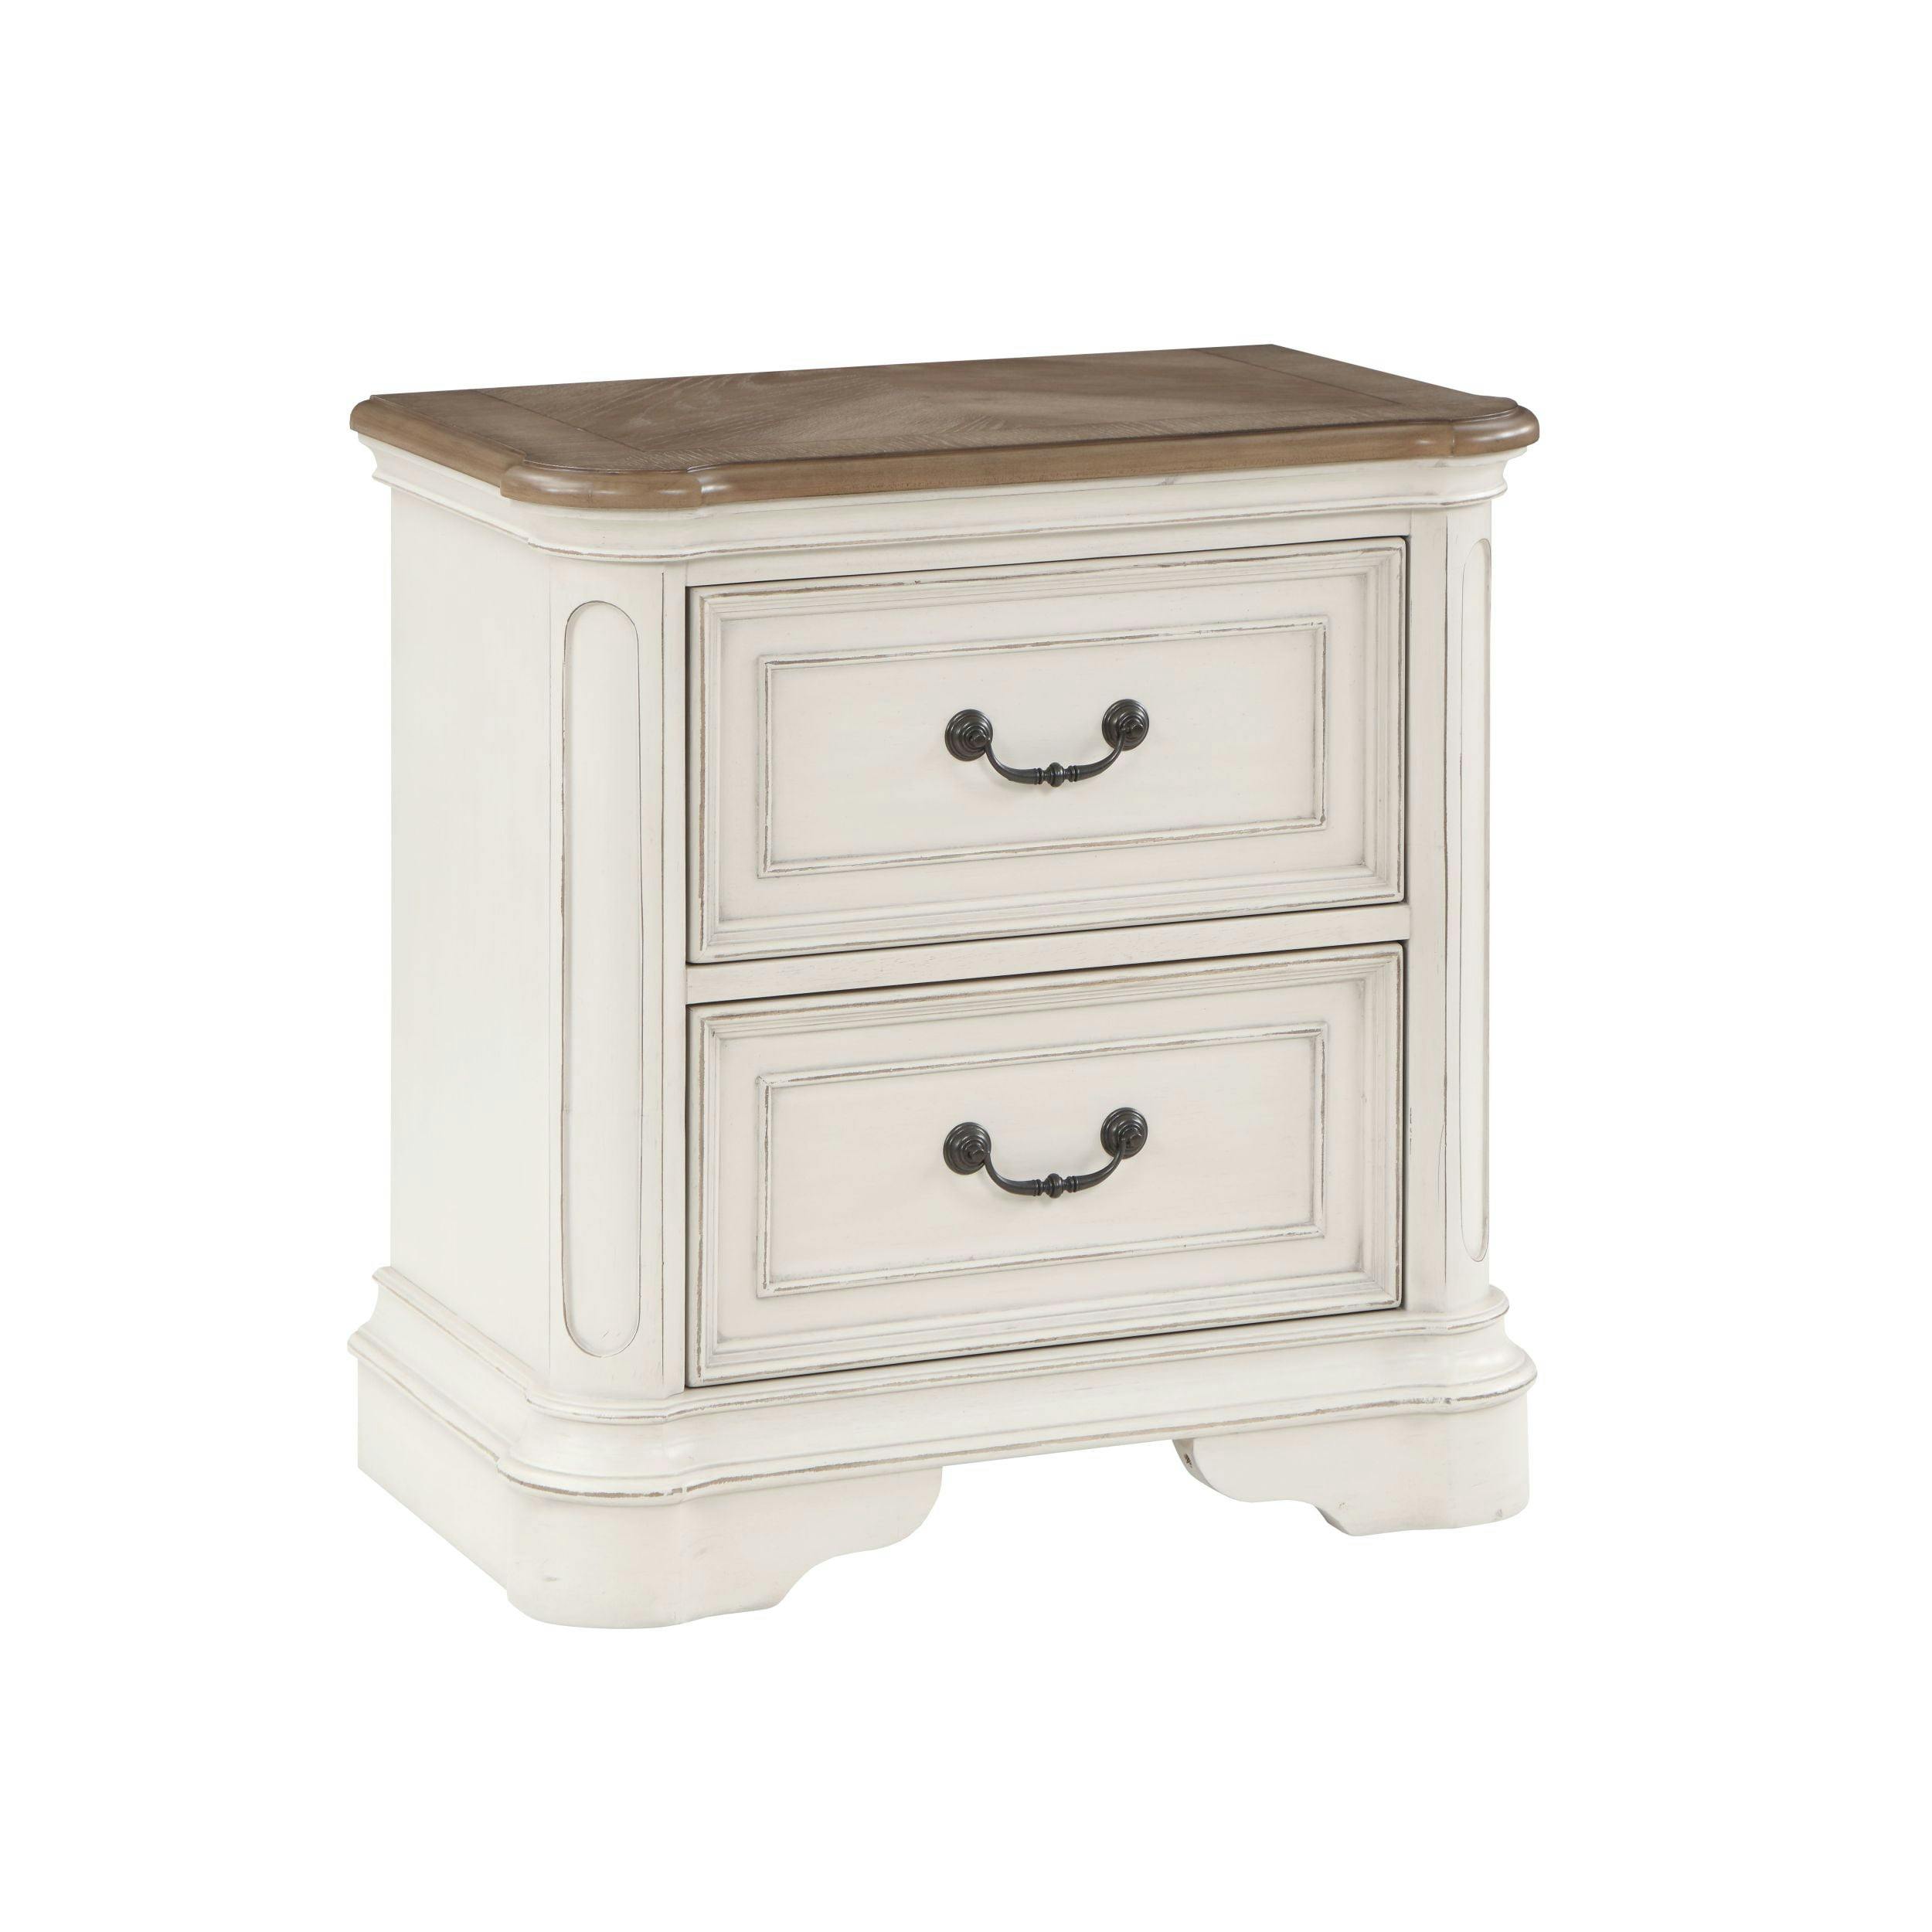 Florian Antique White and Oak 2-Drawer Wooden Nightstand